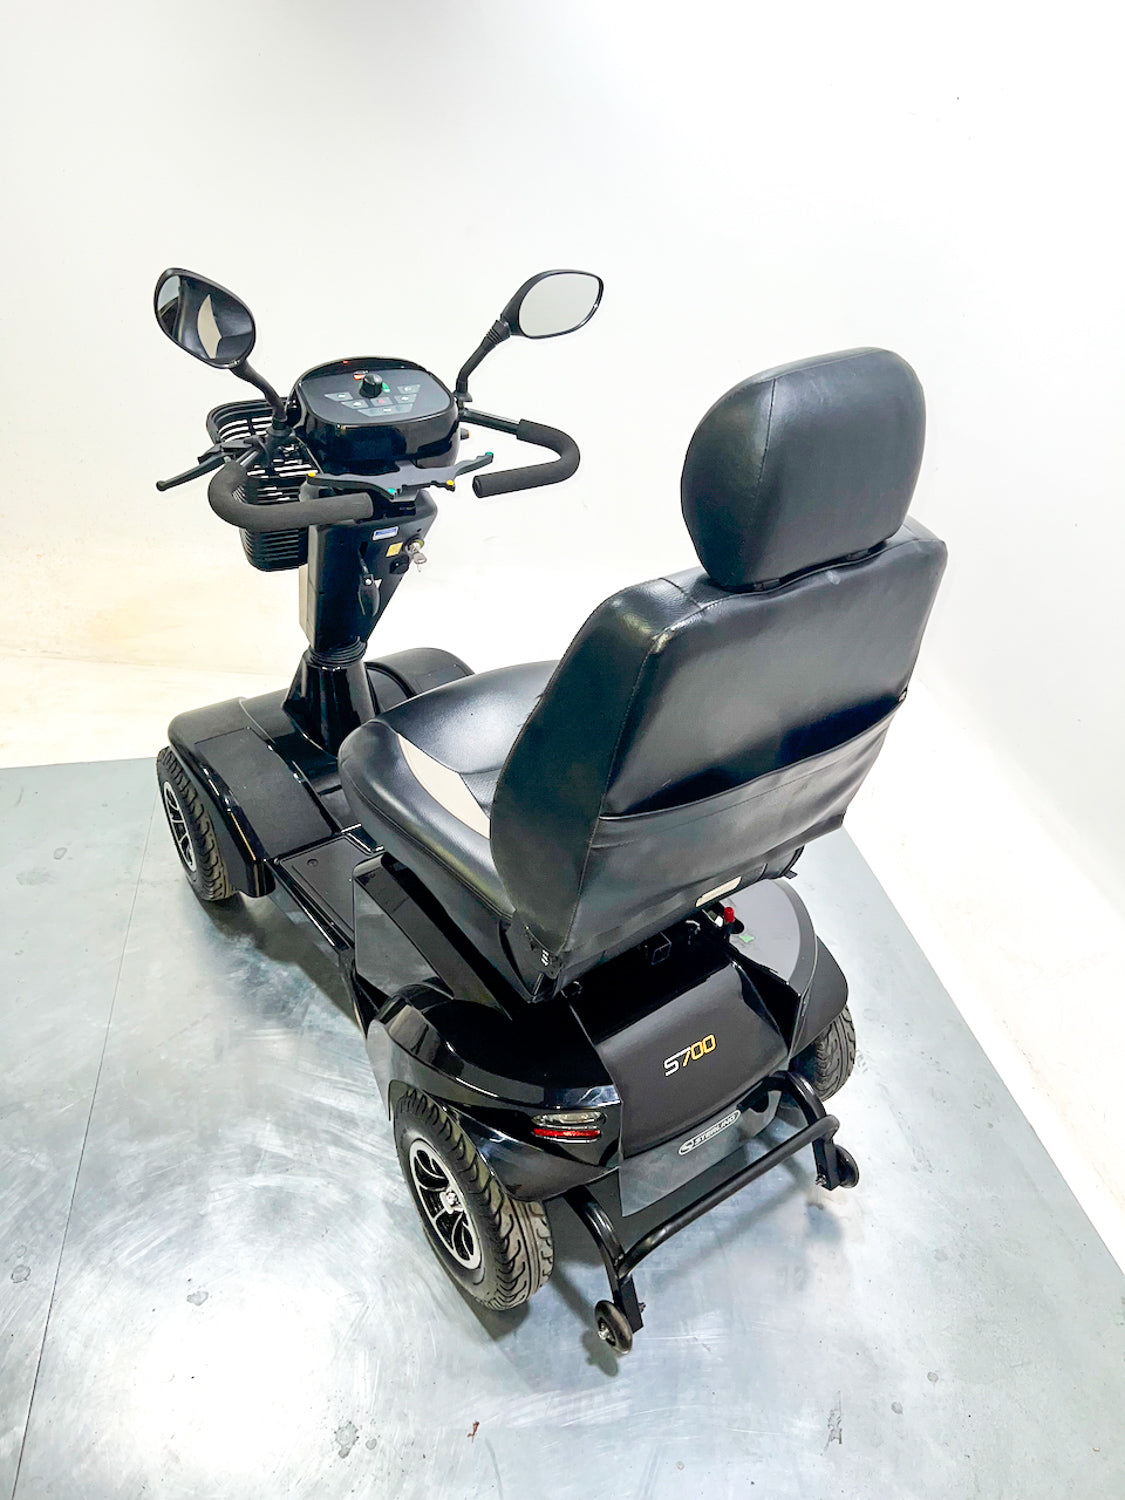 Sunrise Medical Sterling S700 Used 8mph Mobility Scooter Black